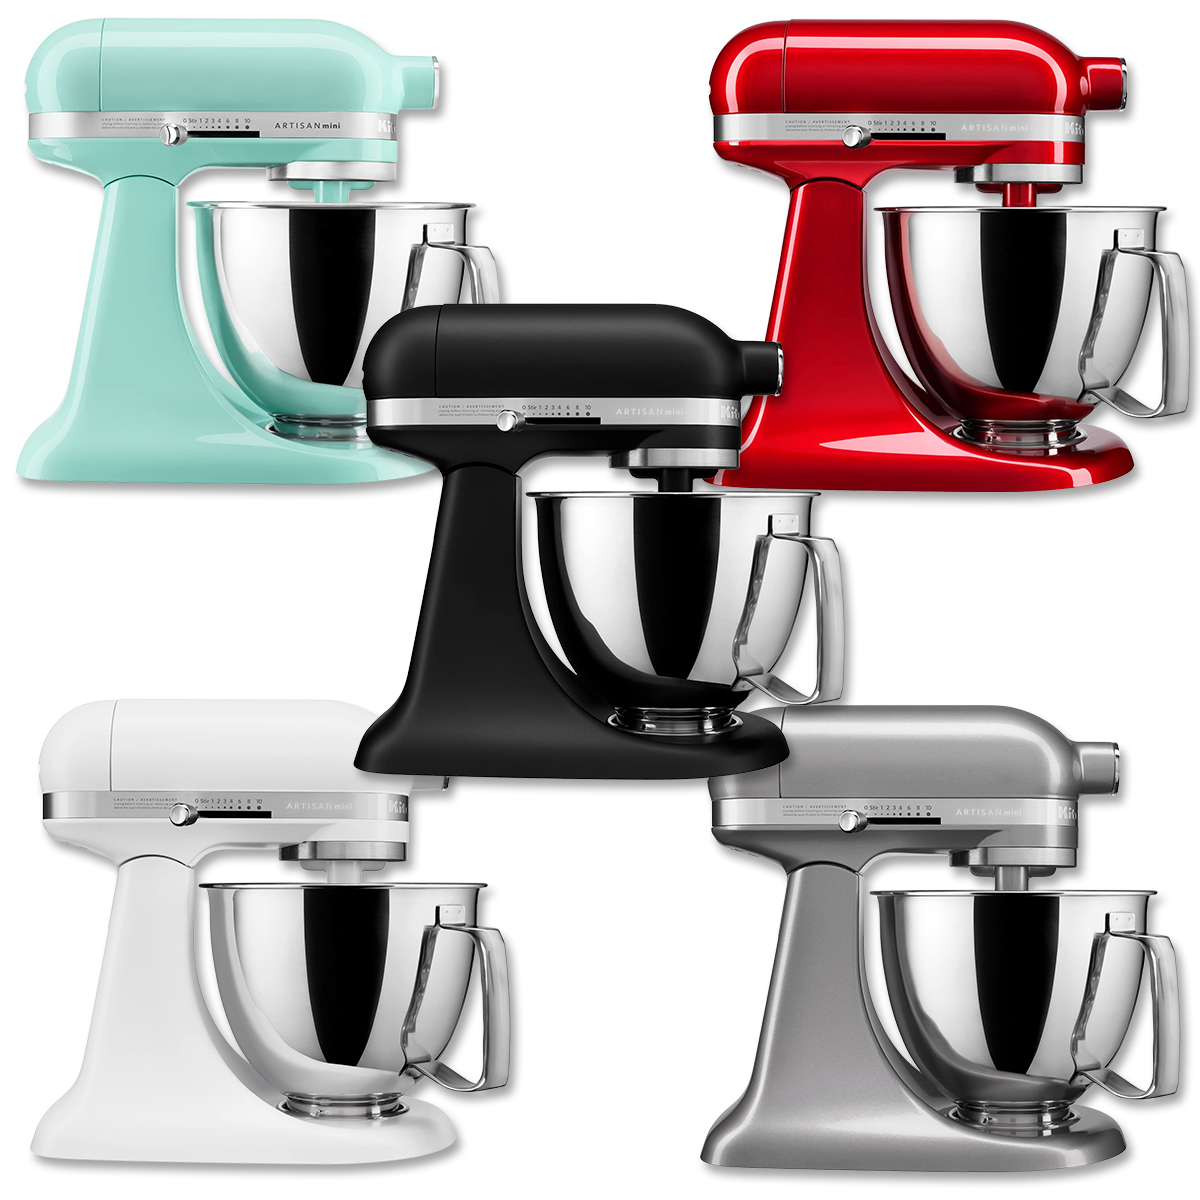 100 Most Wanted Holiday: Why the KitchenAid Professional 5 stand mixer is  the holiday kitchen gadget on everyone's wish list (and it's on sale now!)  - CBS News